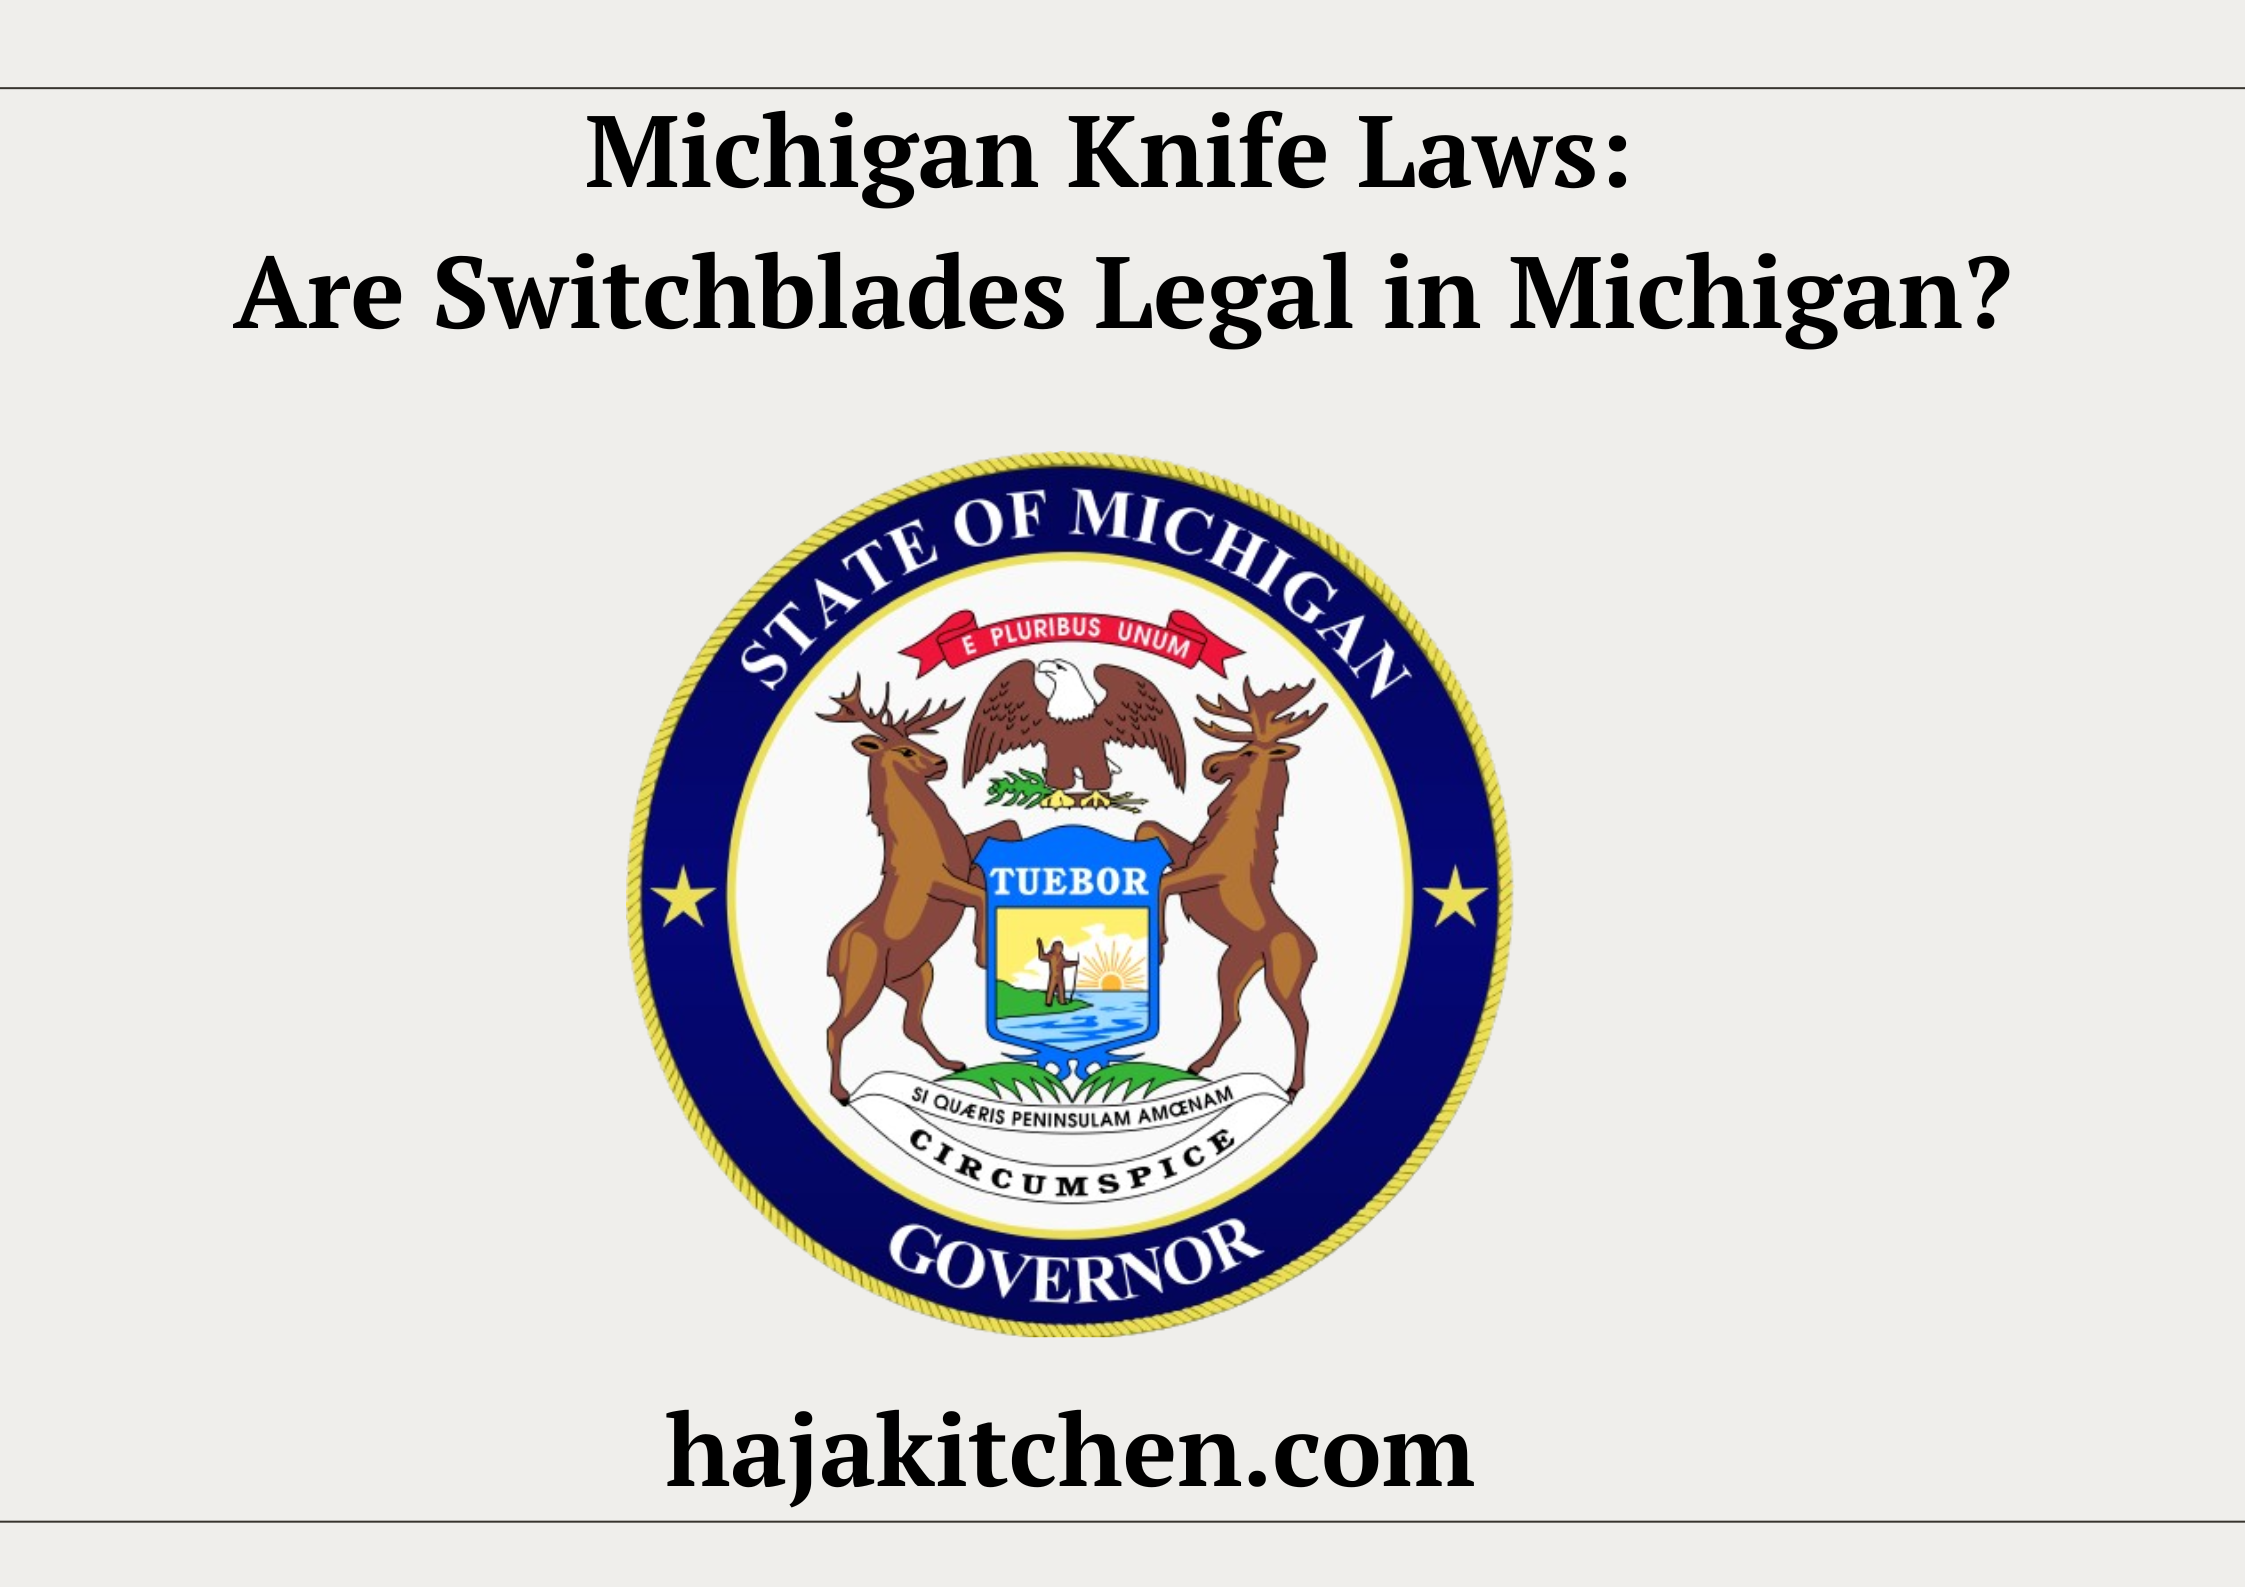 Michigan Knife Laws Are Switchblades Legal in Michigan